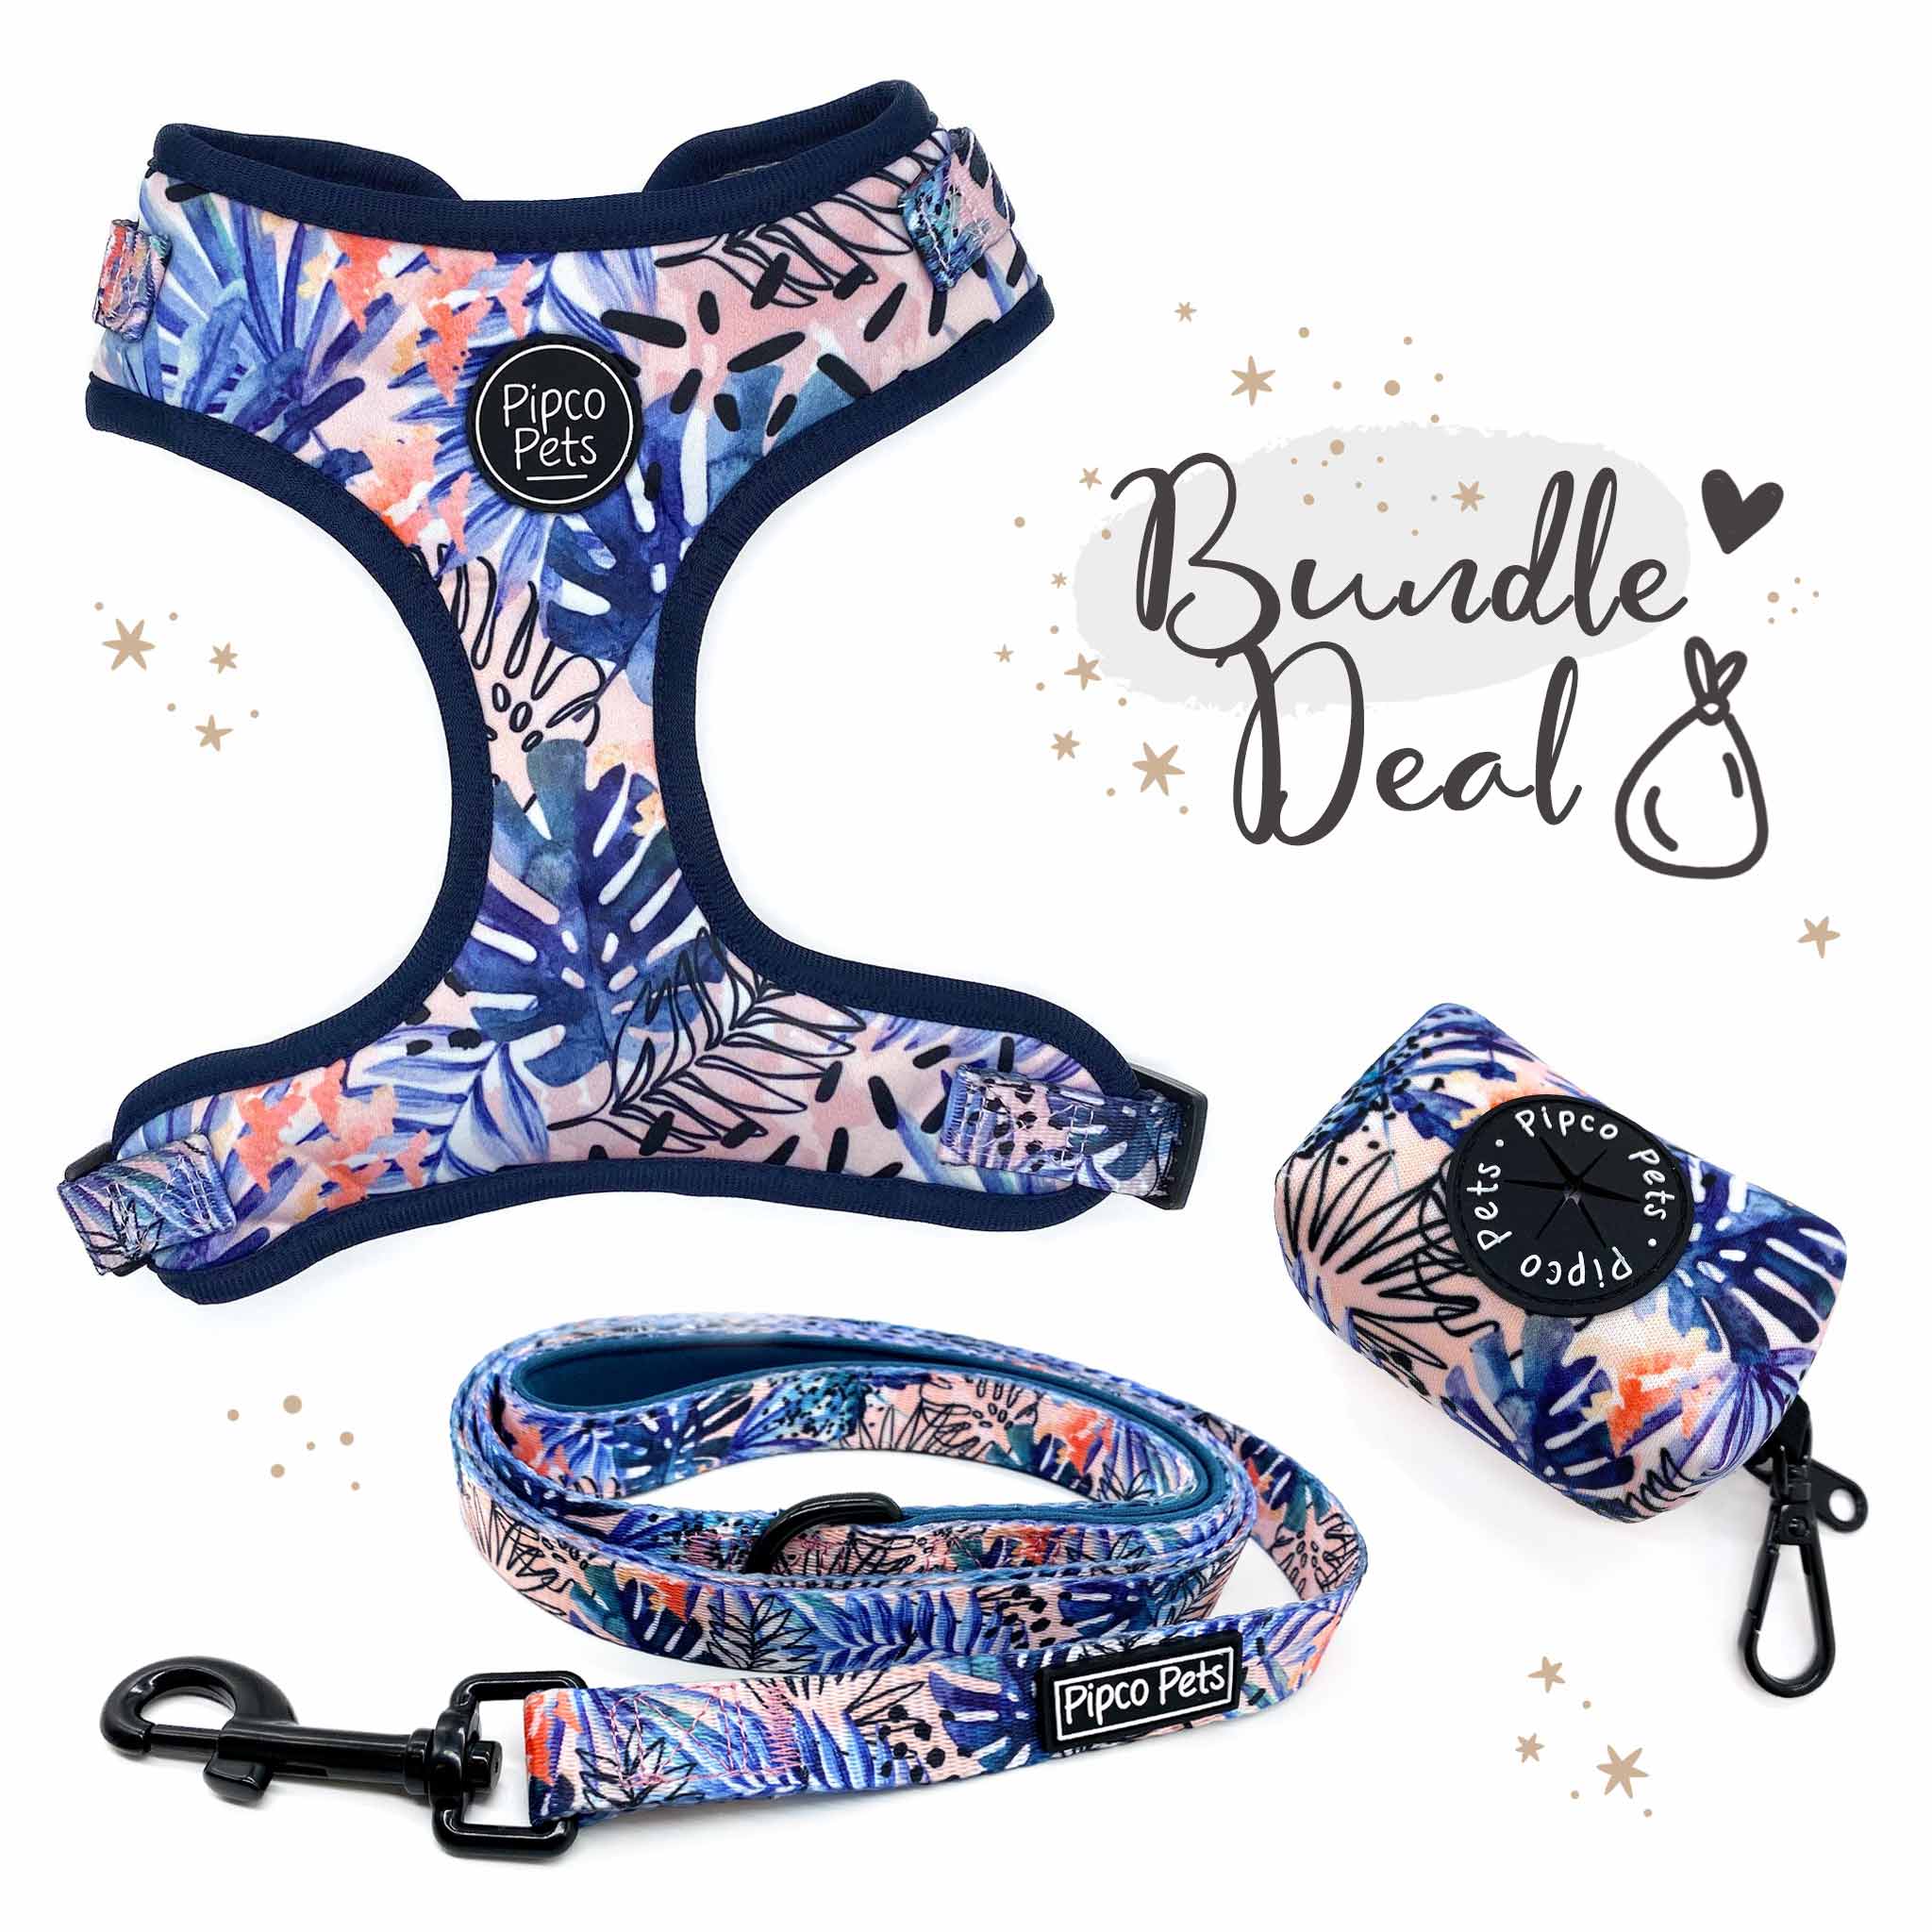 Bundle set including Pipco Pets dog harness, leash, and poo bag dispenser with matching Tropic Fronds tropical leaves print in blue